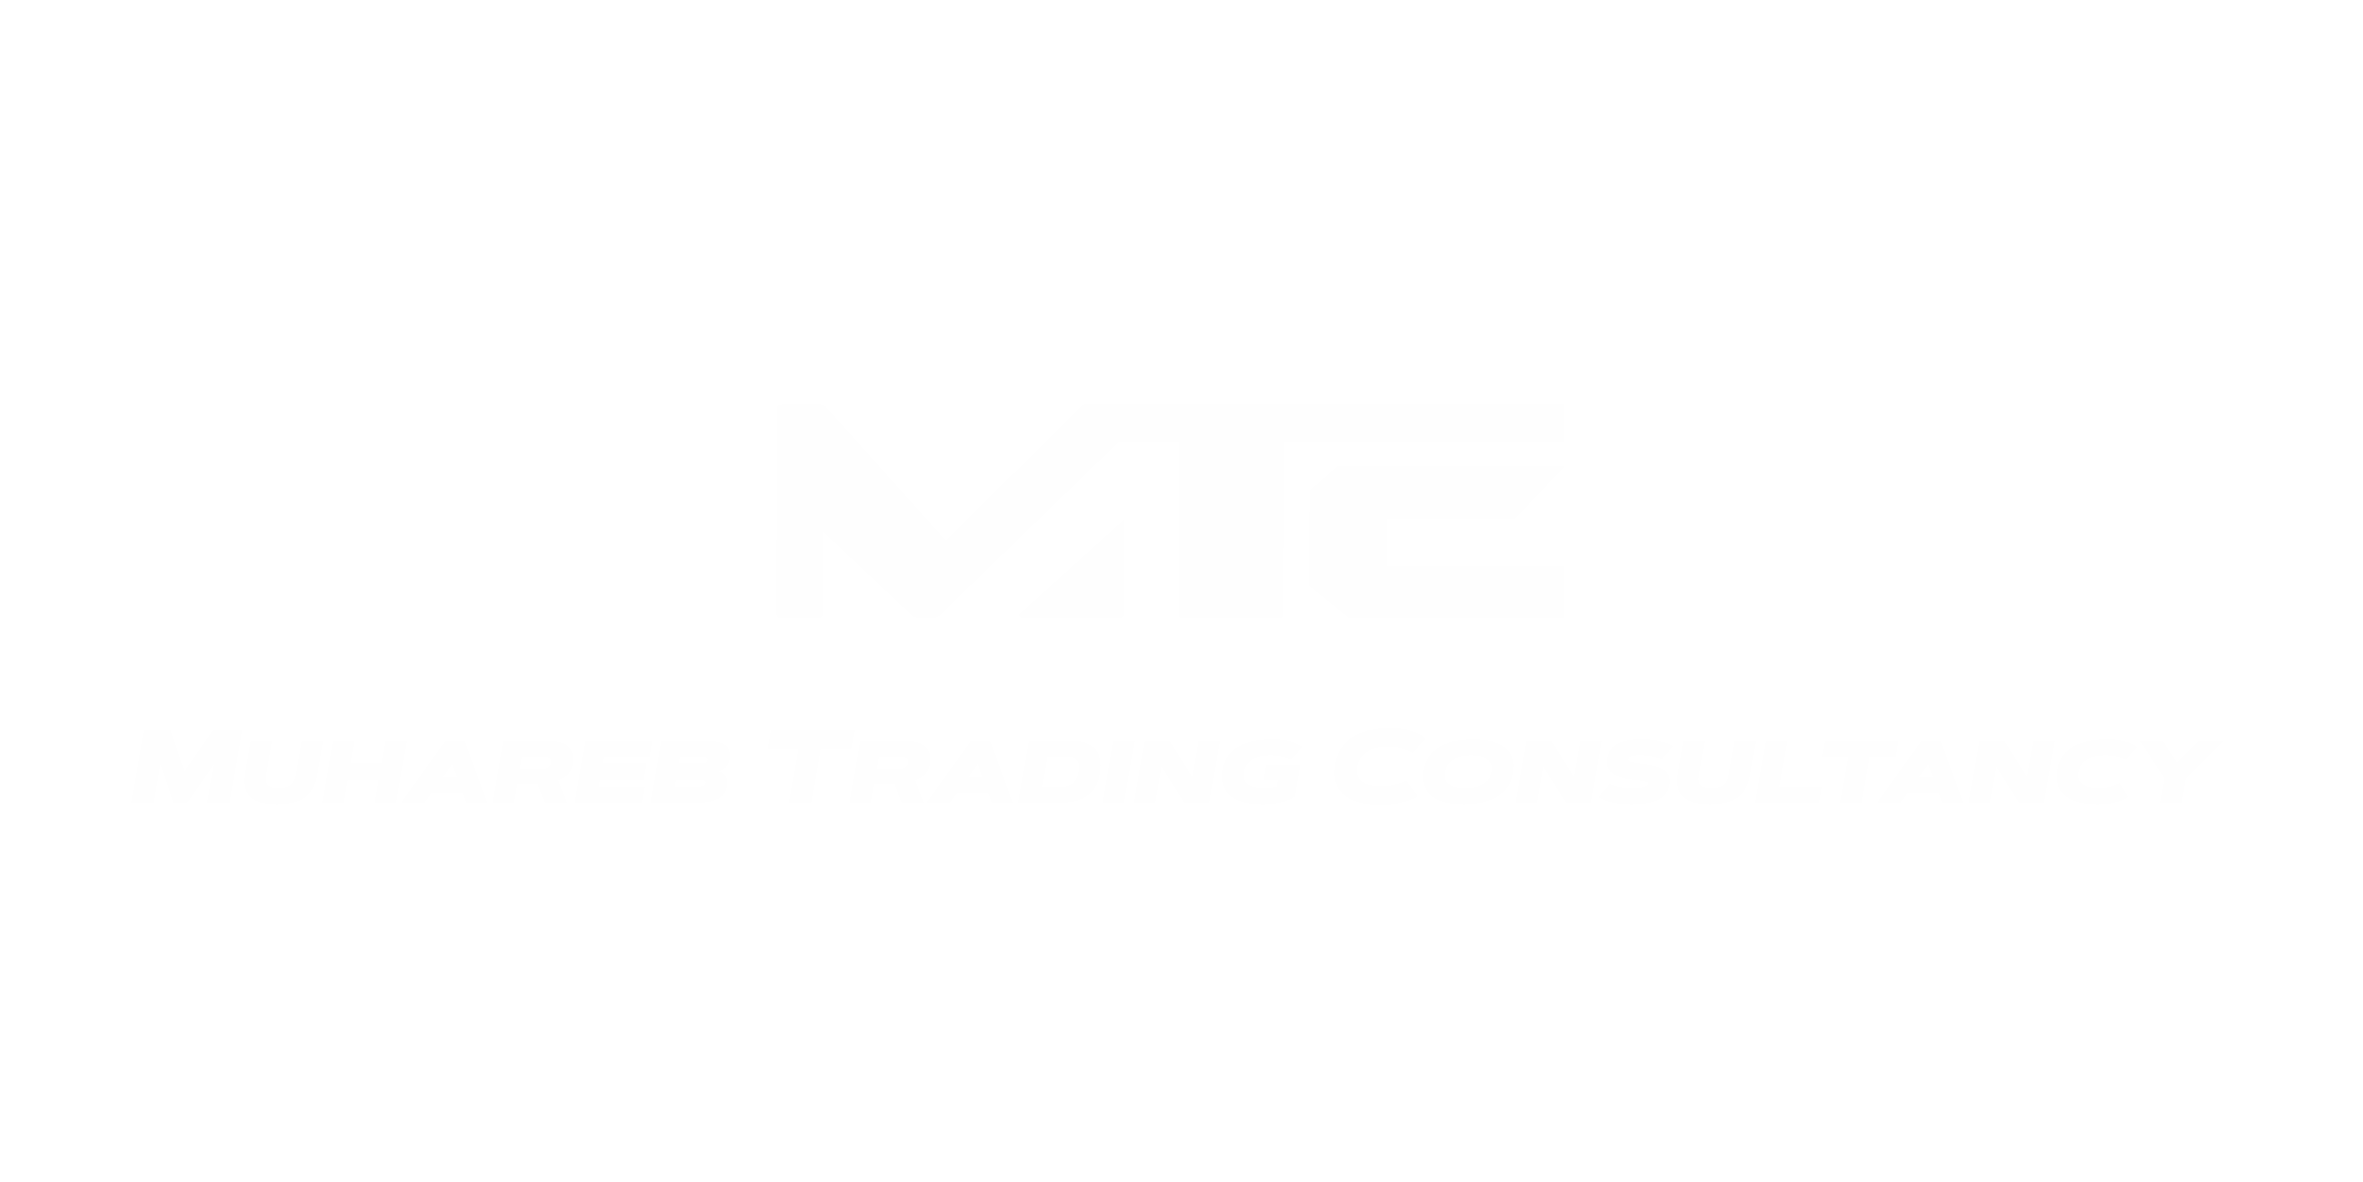 Muhareb Trading Consultancy